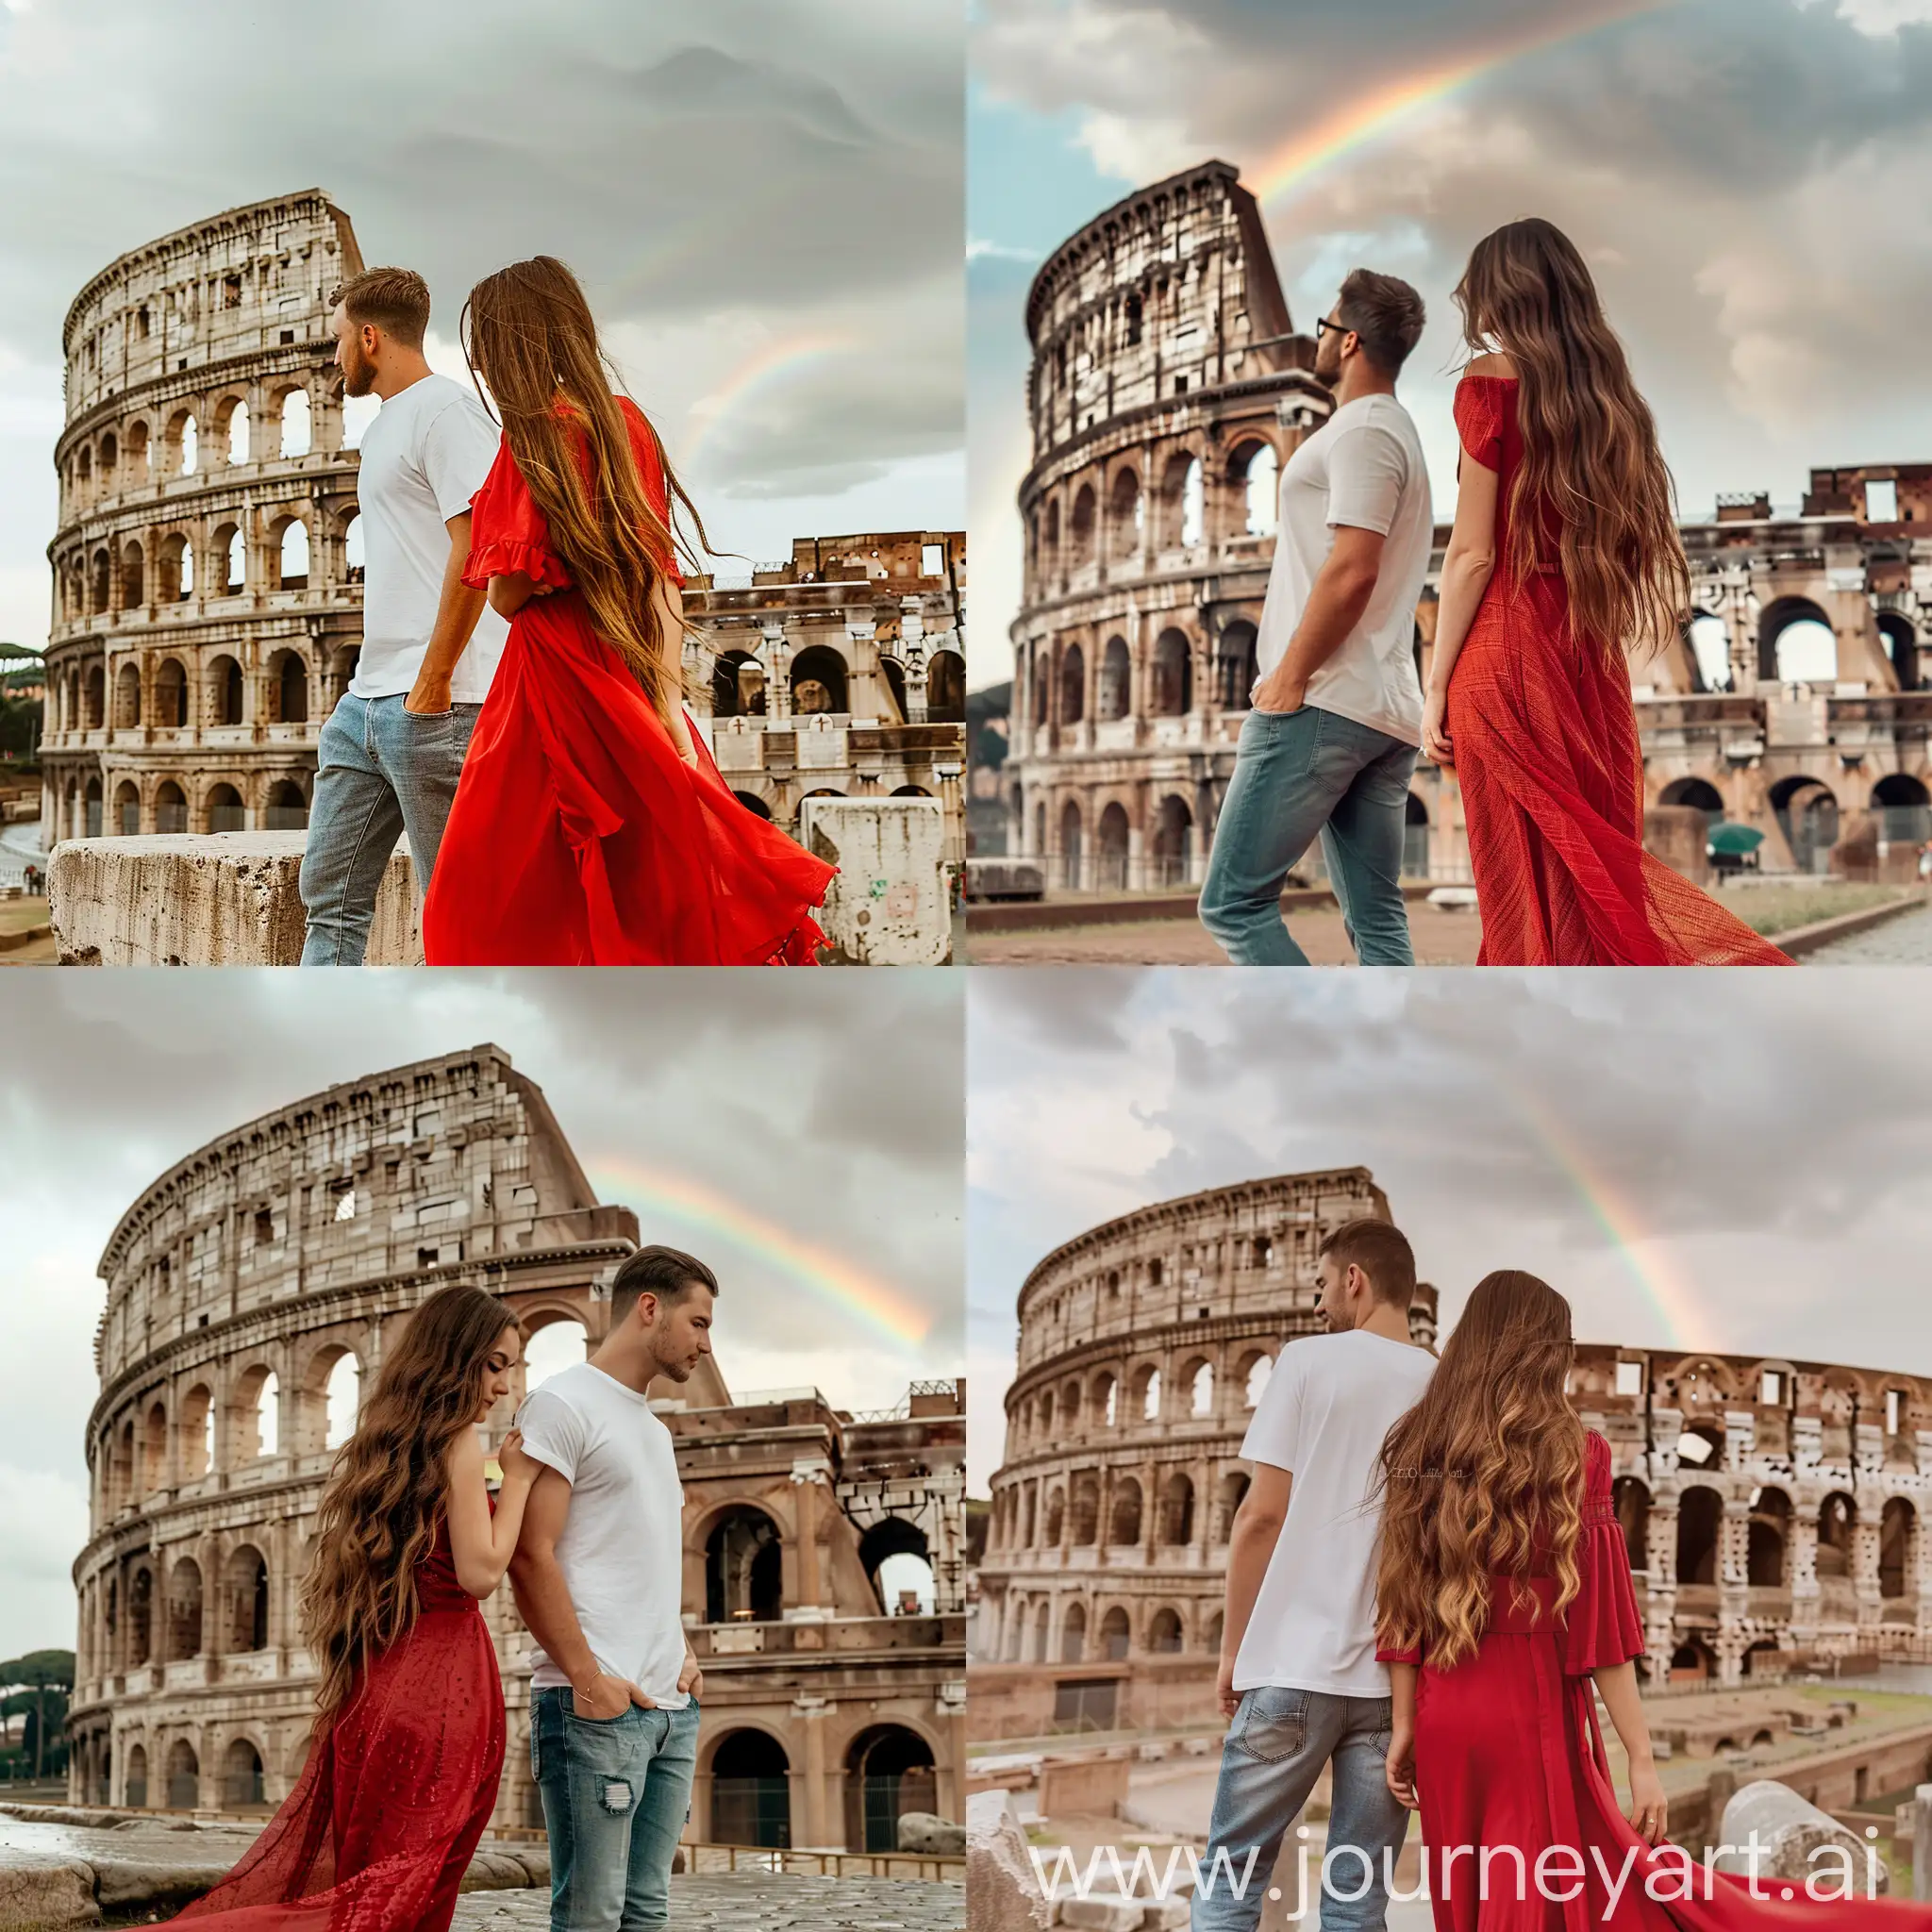 Rome. A couple of lovers in front of the Colosseum: she is wearing a red dress and long brown hair, he is wearing jeans and a white t-shirt. The day is cloudy but not raining, while behind them, the Colosseum and a rainbow can be seen.